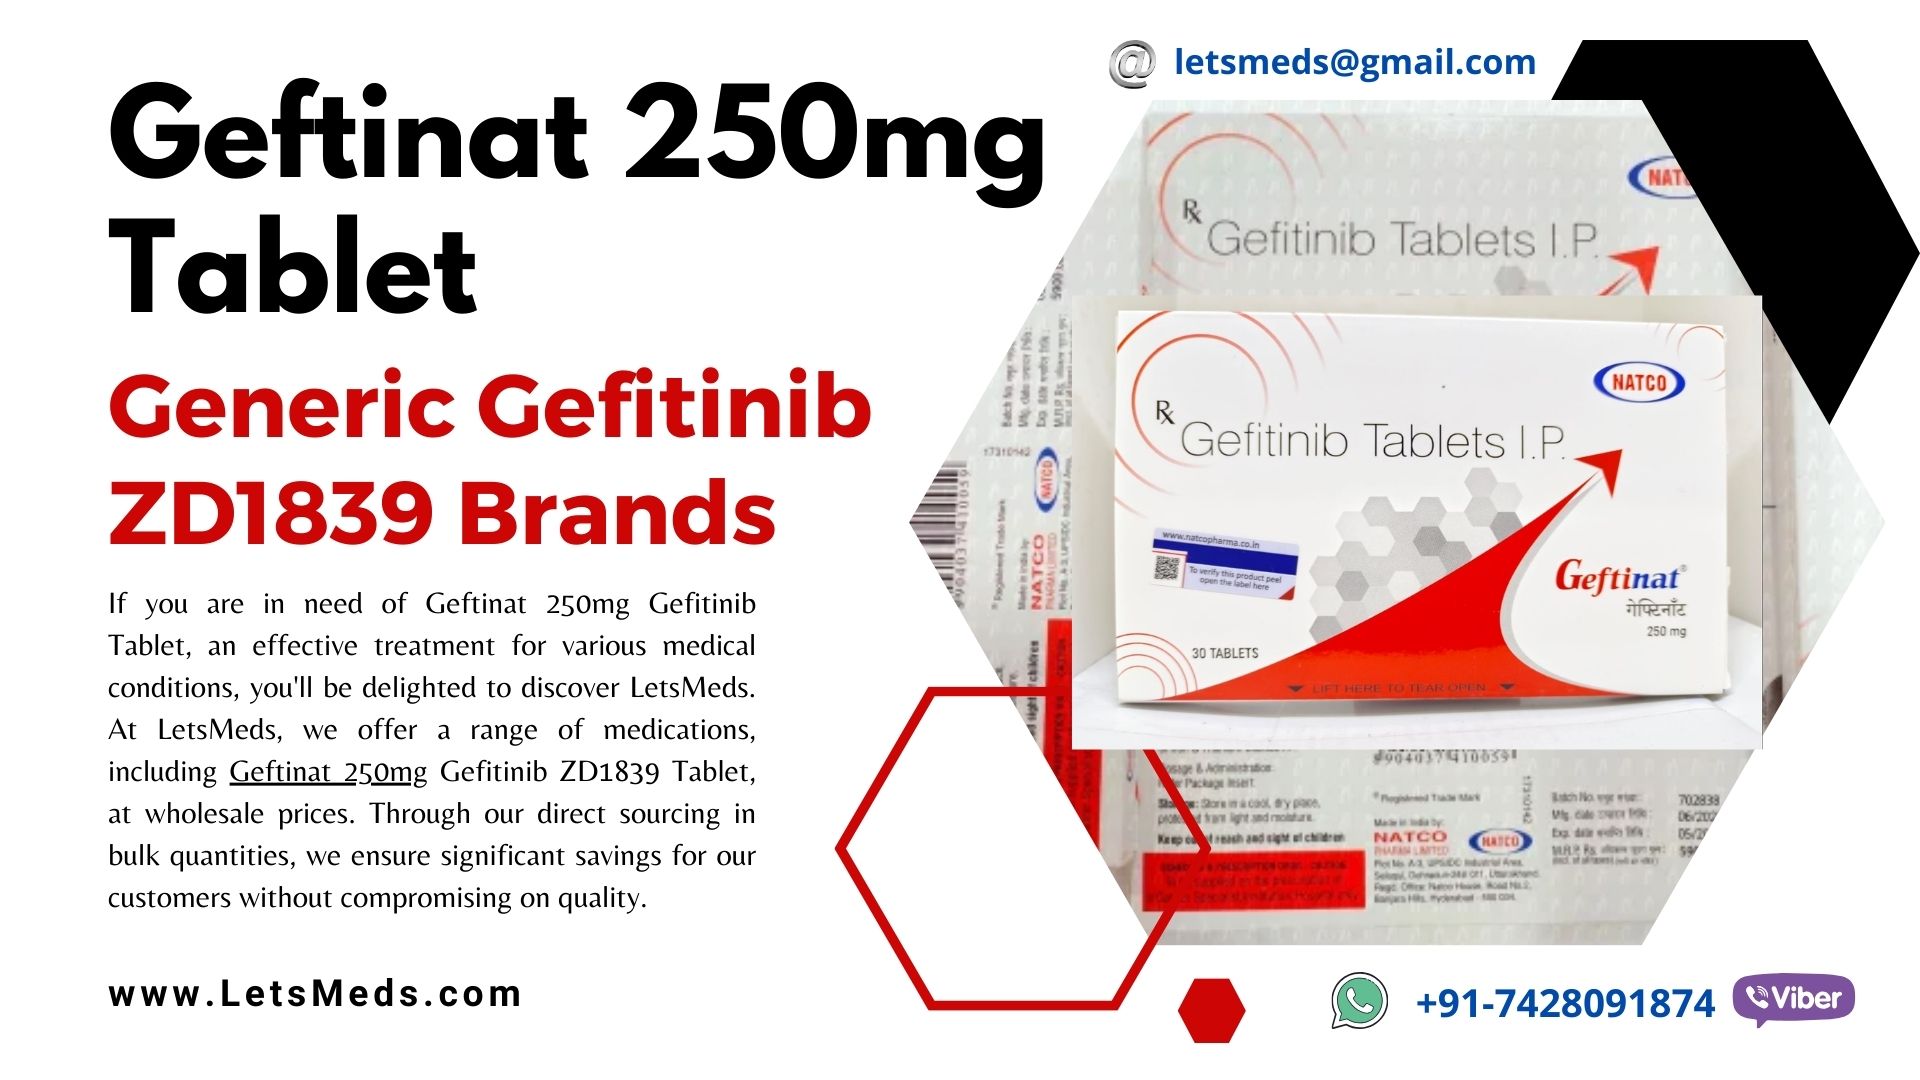 How to Order Gefitinib 250mg Tablets from LetsMeds รูปที่ 1